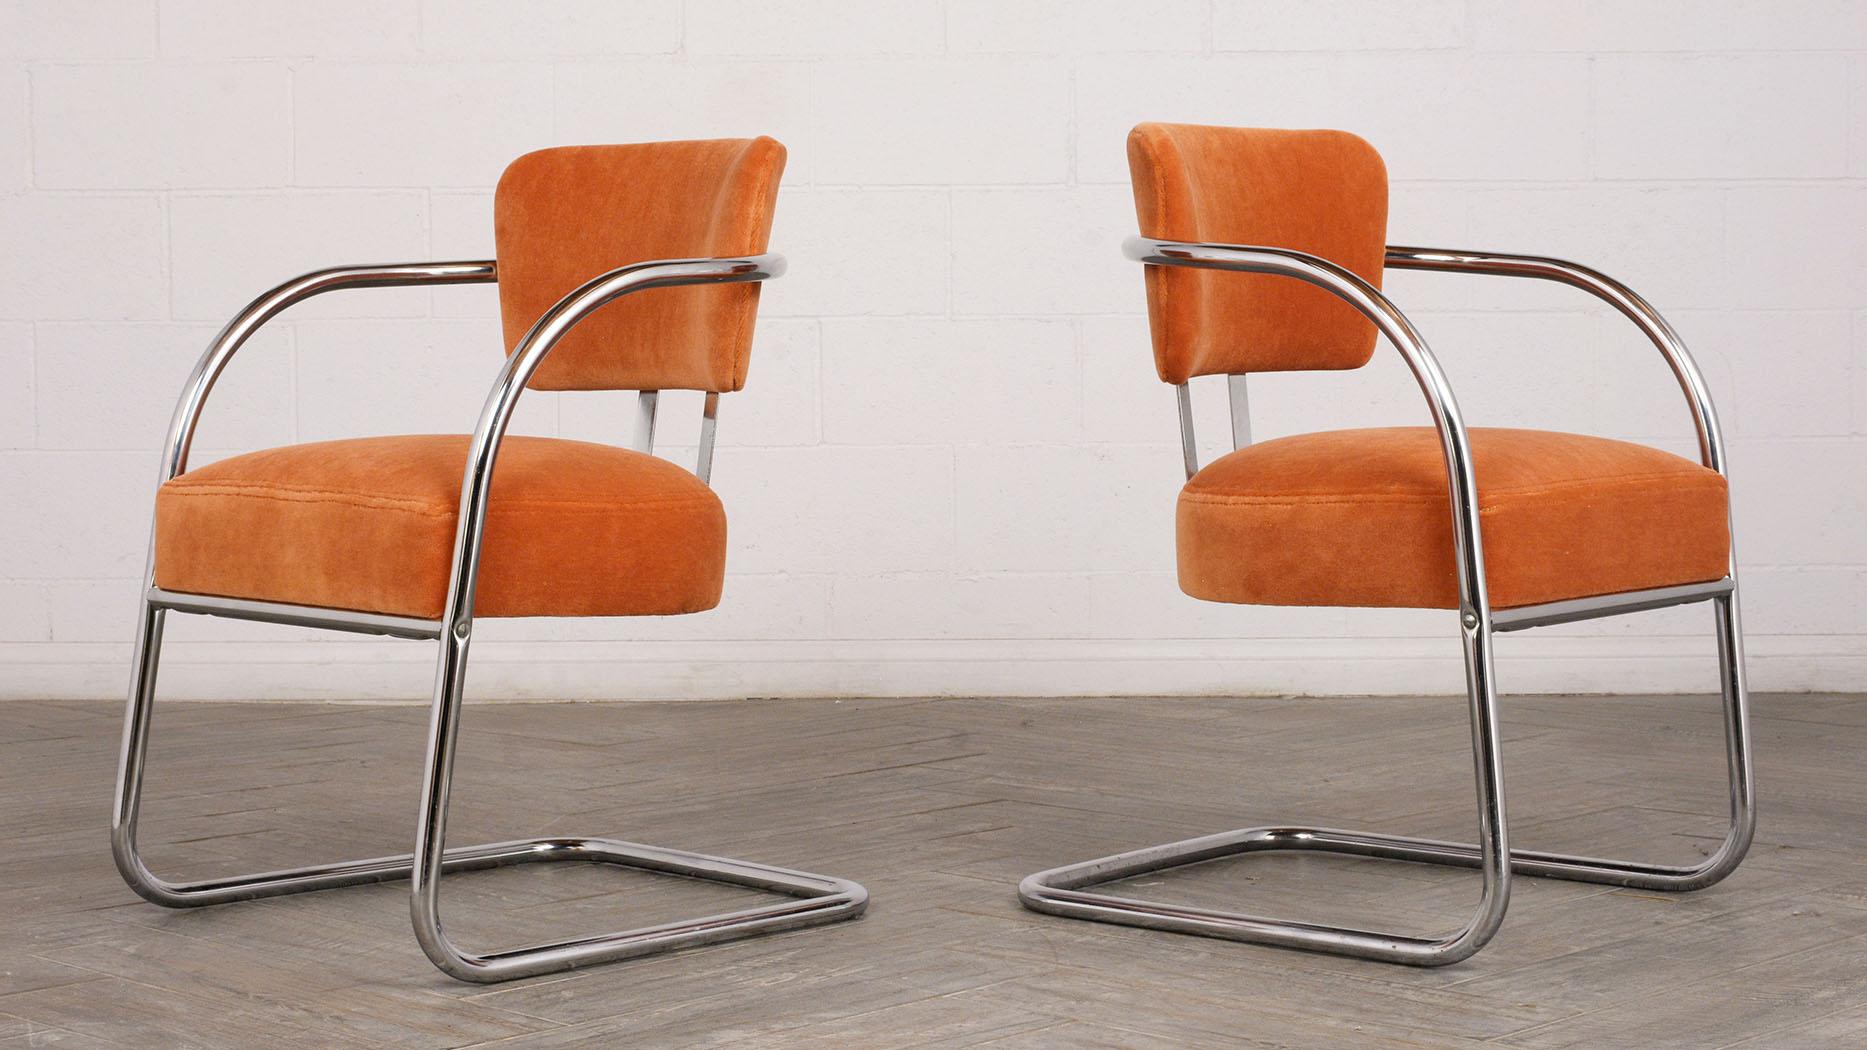 American Set of Two Modern Chrome Frame Lounge Chairs